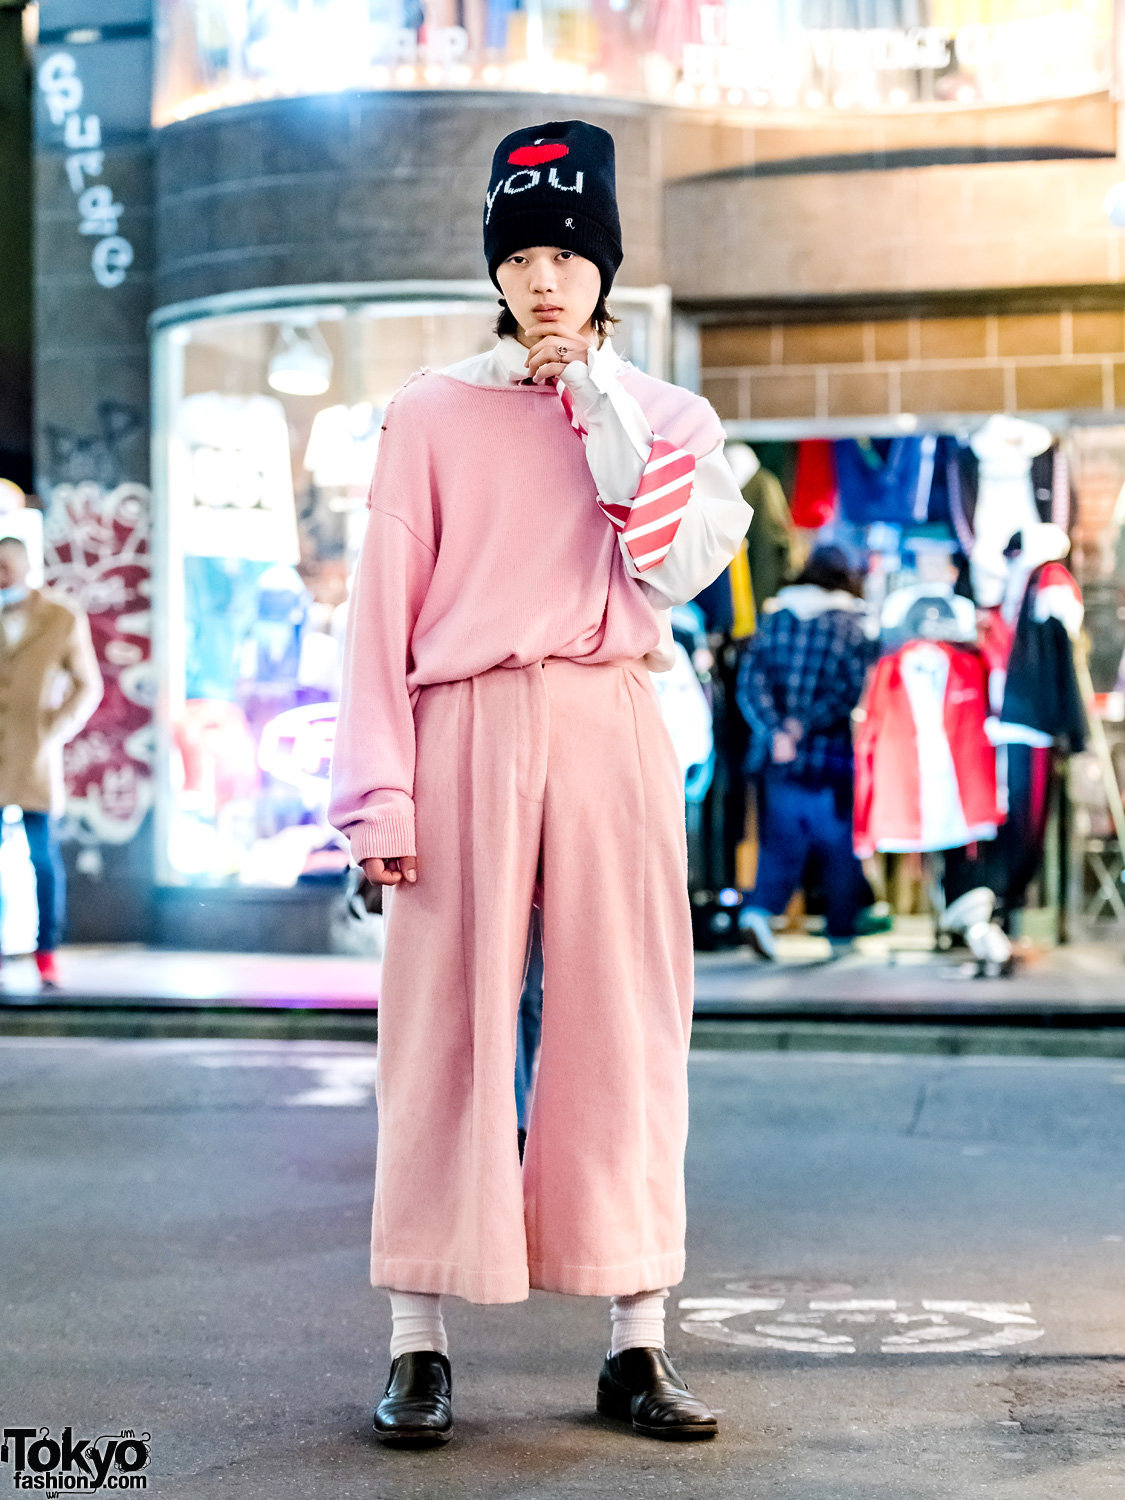 San To Nibun No Ichi Staffer in Pink Menswear Street Style w/ Richie Rich Sweater, Vaquera NYC Pants, Gucci Leather Loafers & Raf Simons Beanie